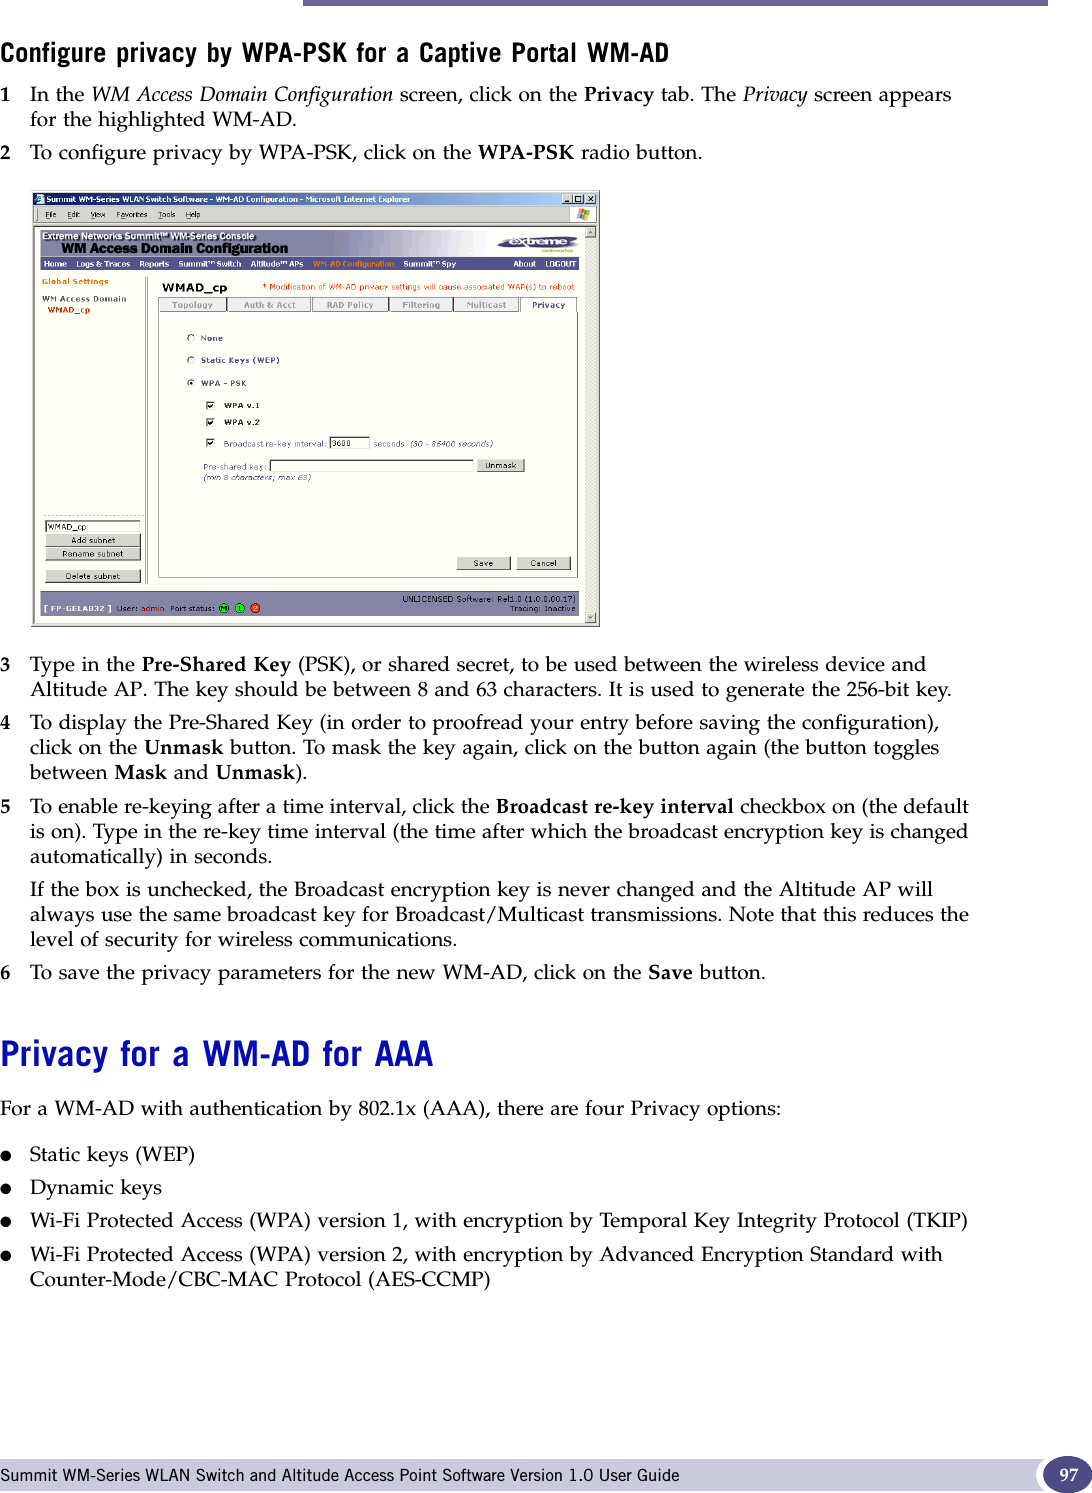 Privacy for a WM-AD Summit WM-Series WLAN Switch and Altitude Access Point Software Version 1.0 User Guide 97Configure privacy by WPA-PSK for a Captive Portal WM-AD1In the WM Access Domain Configuration screen, click on the Privacy tab. The Privacy screen appears for the highlighted WM-AD. 2To configure privacy by WPA-PSK, click on the WPA-PSK radio button.3Type in the Pre-Shared Key (PSK), or shared secret, to be used between the wireless device and Altitude AP. The key should be between 8 and 63 characters. It is used to generate the 256-bit key.4To display the Pre-Shared Key (in order to proofread your entry before saving the configuration), click on the Unmask button. To mask the key again, click on the button again (the button toggles between Mask and Unmask).5To enable re-keying after a time interval, click the Broadcast re-key interval checkbox on (the default is on). Type in the re-key time interval (the time after which the broadcast encryption key is changed automatically) in seconds.If the box is unchecked, the Broadcast encryption key is never changed and the Altitude AP will always use the same broadcast key for Broadcast/Multicast transmissions. Note that this reduces the level of security for wireless communications.6To save the privacy parameters for the new WM-AD, click on the Save button.Privacy for a WM-AD for AAAFor a WM-AD with authentication by 802.1x (AAA), there are four Privacy options:●Static keys (WEP)●Dynamic keys●Wi-Fi Protected Access (WPA) version 1, with encryption by Temporal Key Integrity Protocol (TKIP)●Wi-Fi Protected Access (WPA) version 2, with encryption by Advanced Encryption Standard with Counter-Mode/CBC-MAC Protocol (AES-CCMP)